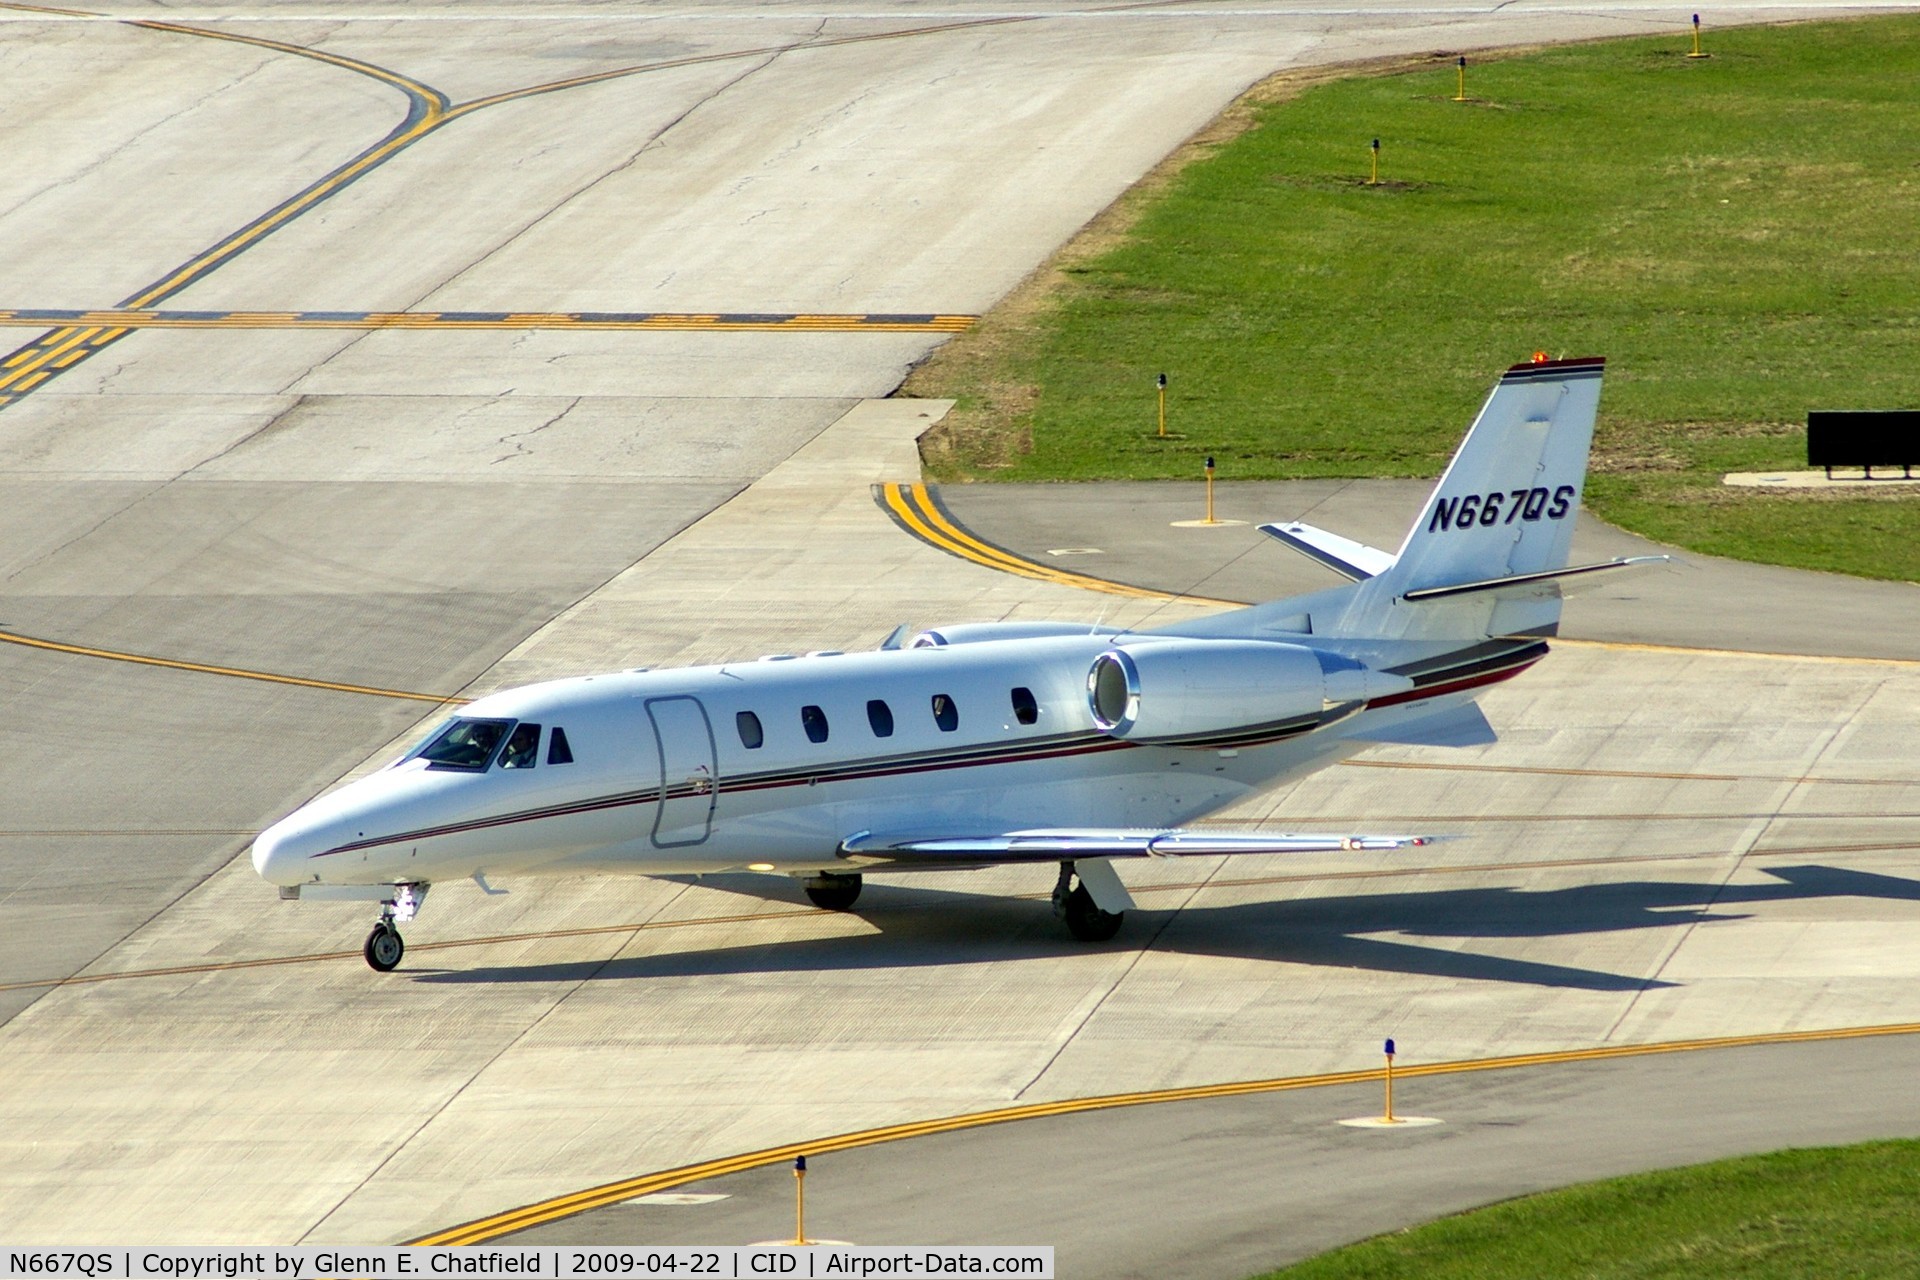 N667QS, 2004 Cessna 560XL Citation Excel C/N 560-5365, Taxiing on Alpha on the way to Landmark FBO